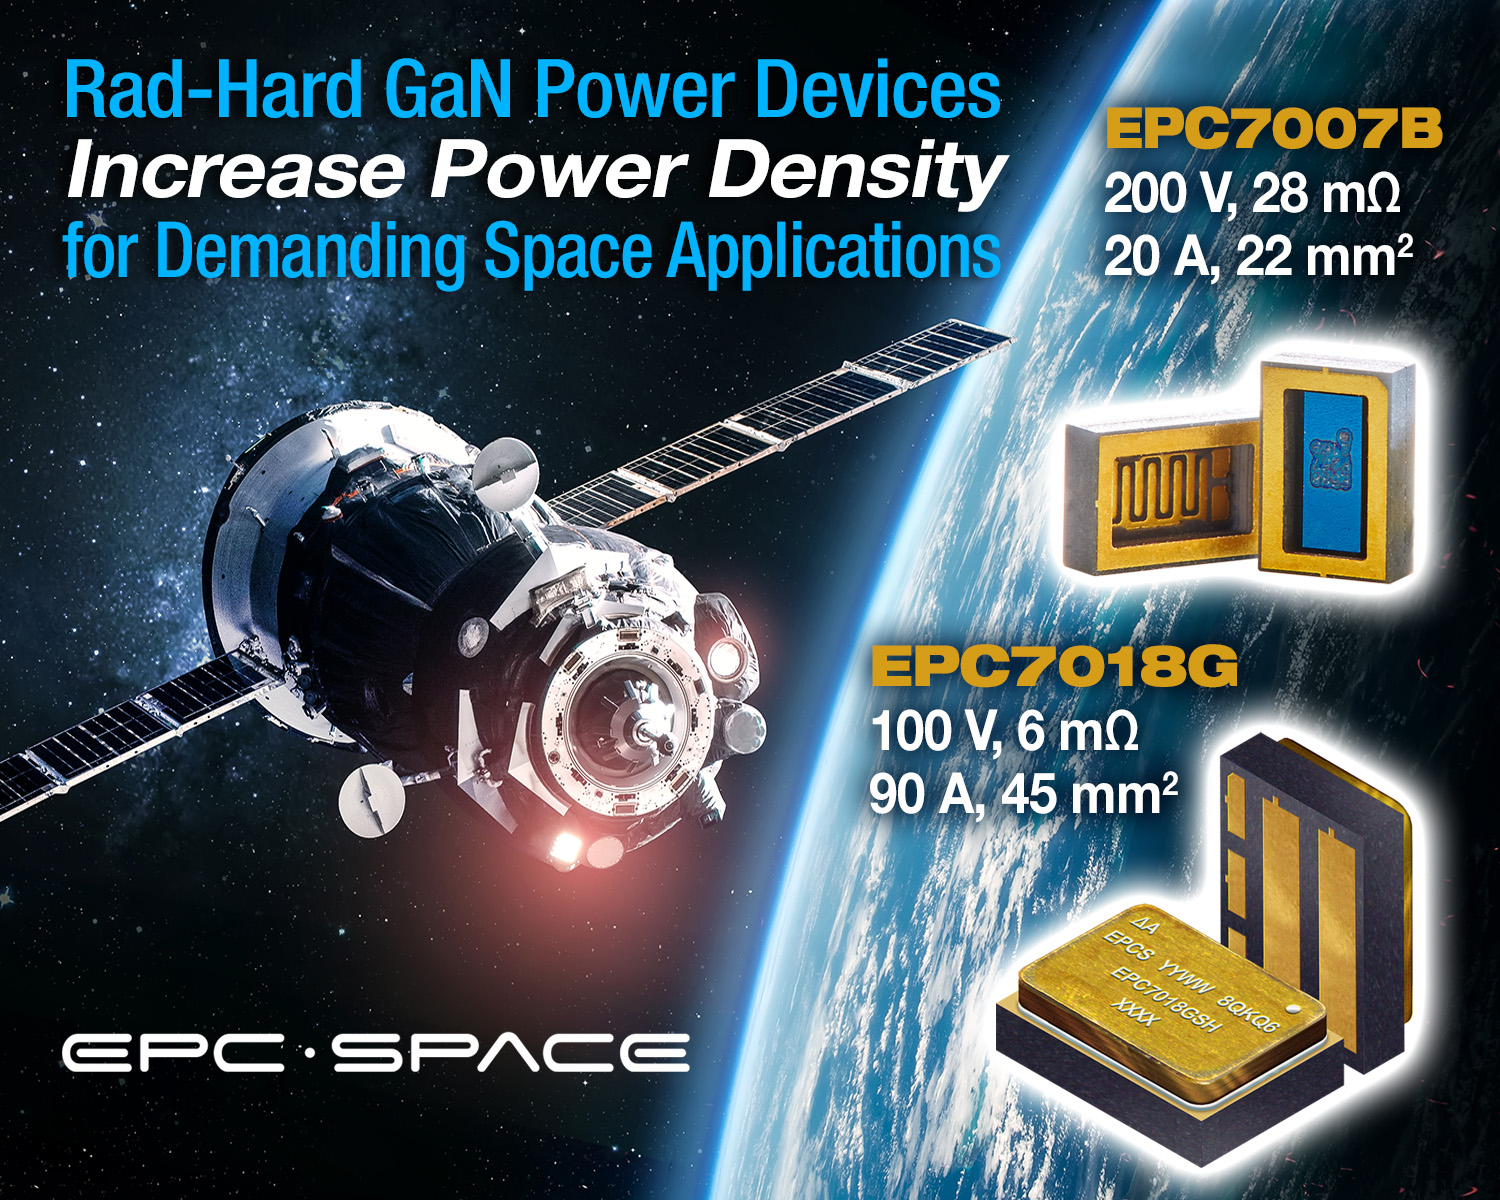 100 V and 200 V Rad-Hard GaN Power Devices Increase Power Density for Demanding Space Applications